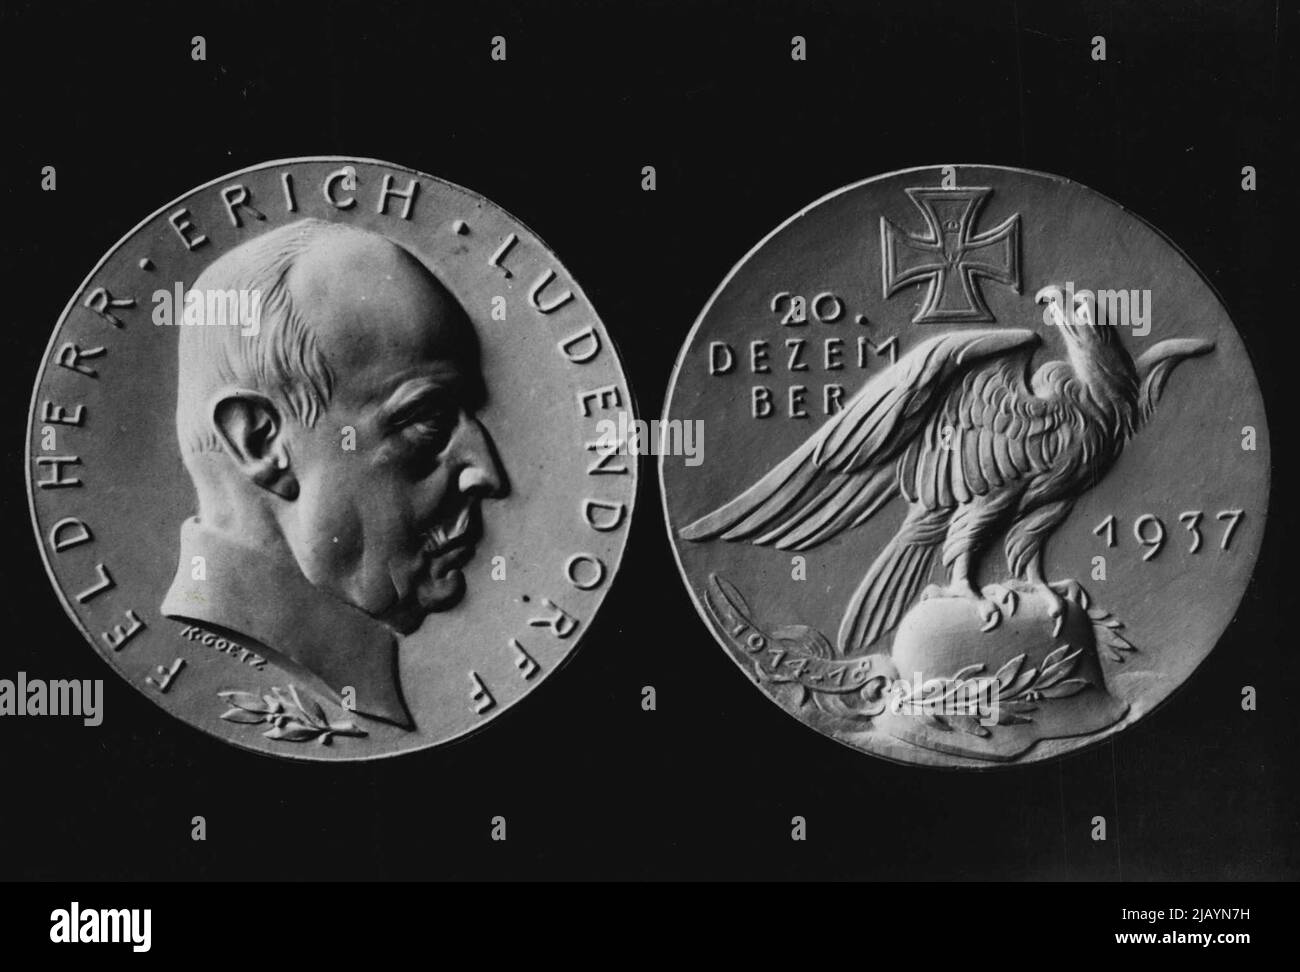 A Ludendorff - Memorial - Medal -- According to a draft of the famous Munich Medalists Karl Goetze which the Bavarian main munzant brought visible in the picture Ludendorff - Memorial - medal out. February 26, 1938. (Photo by Atlantic Photo). Stock Photo